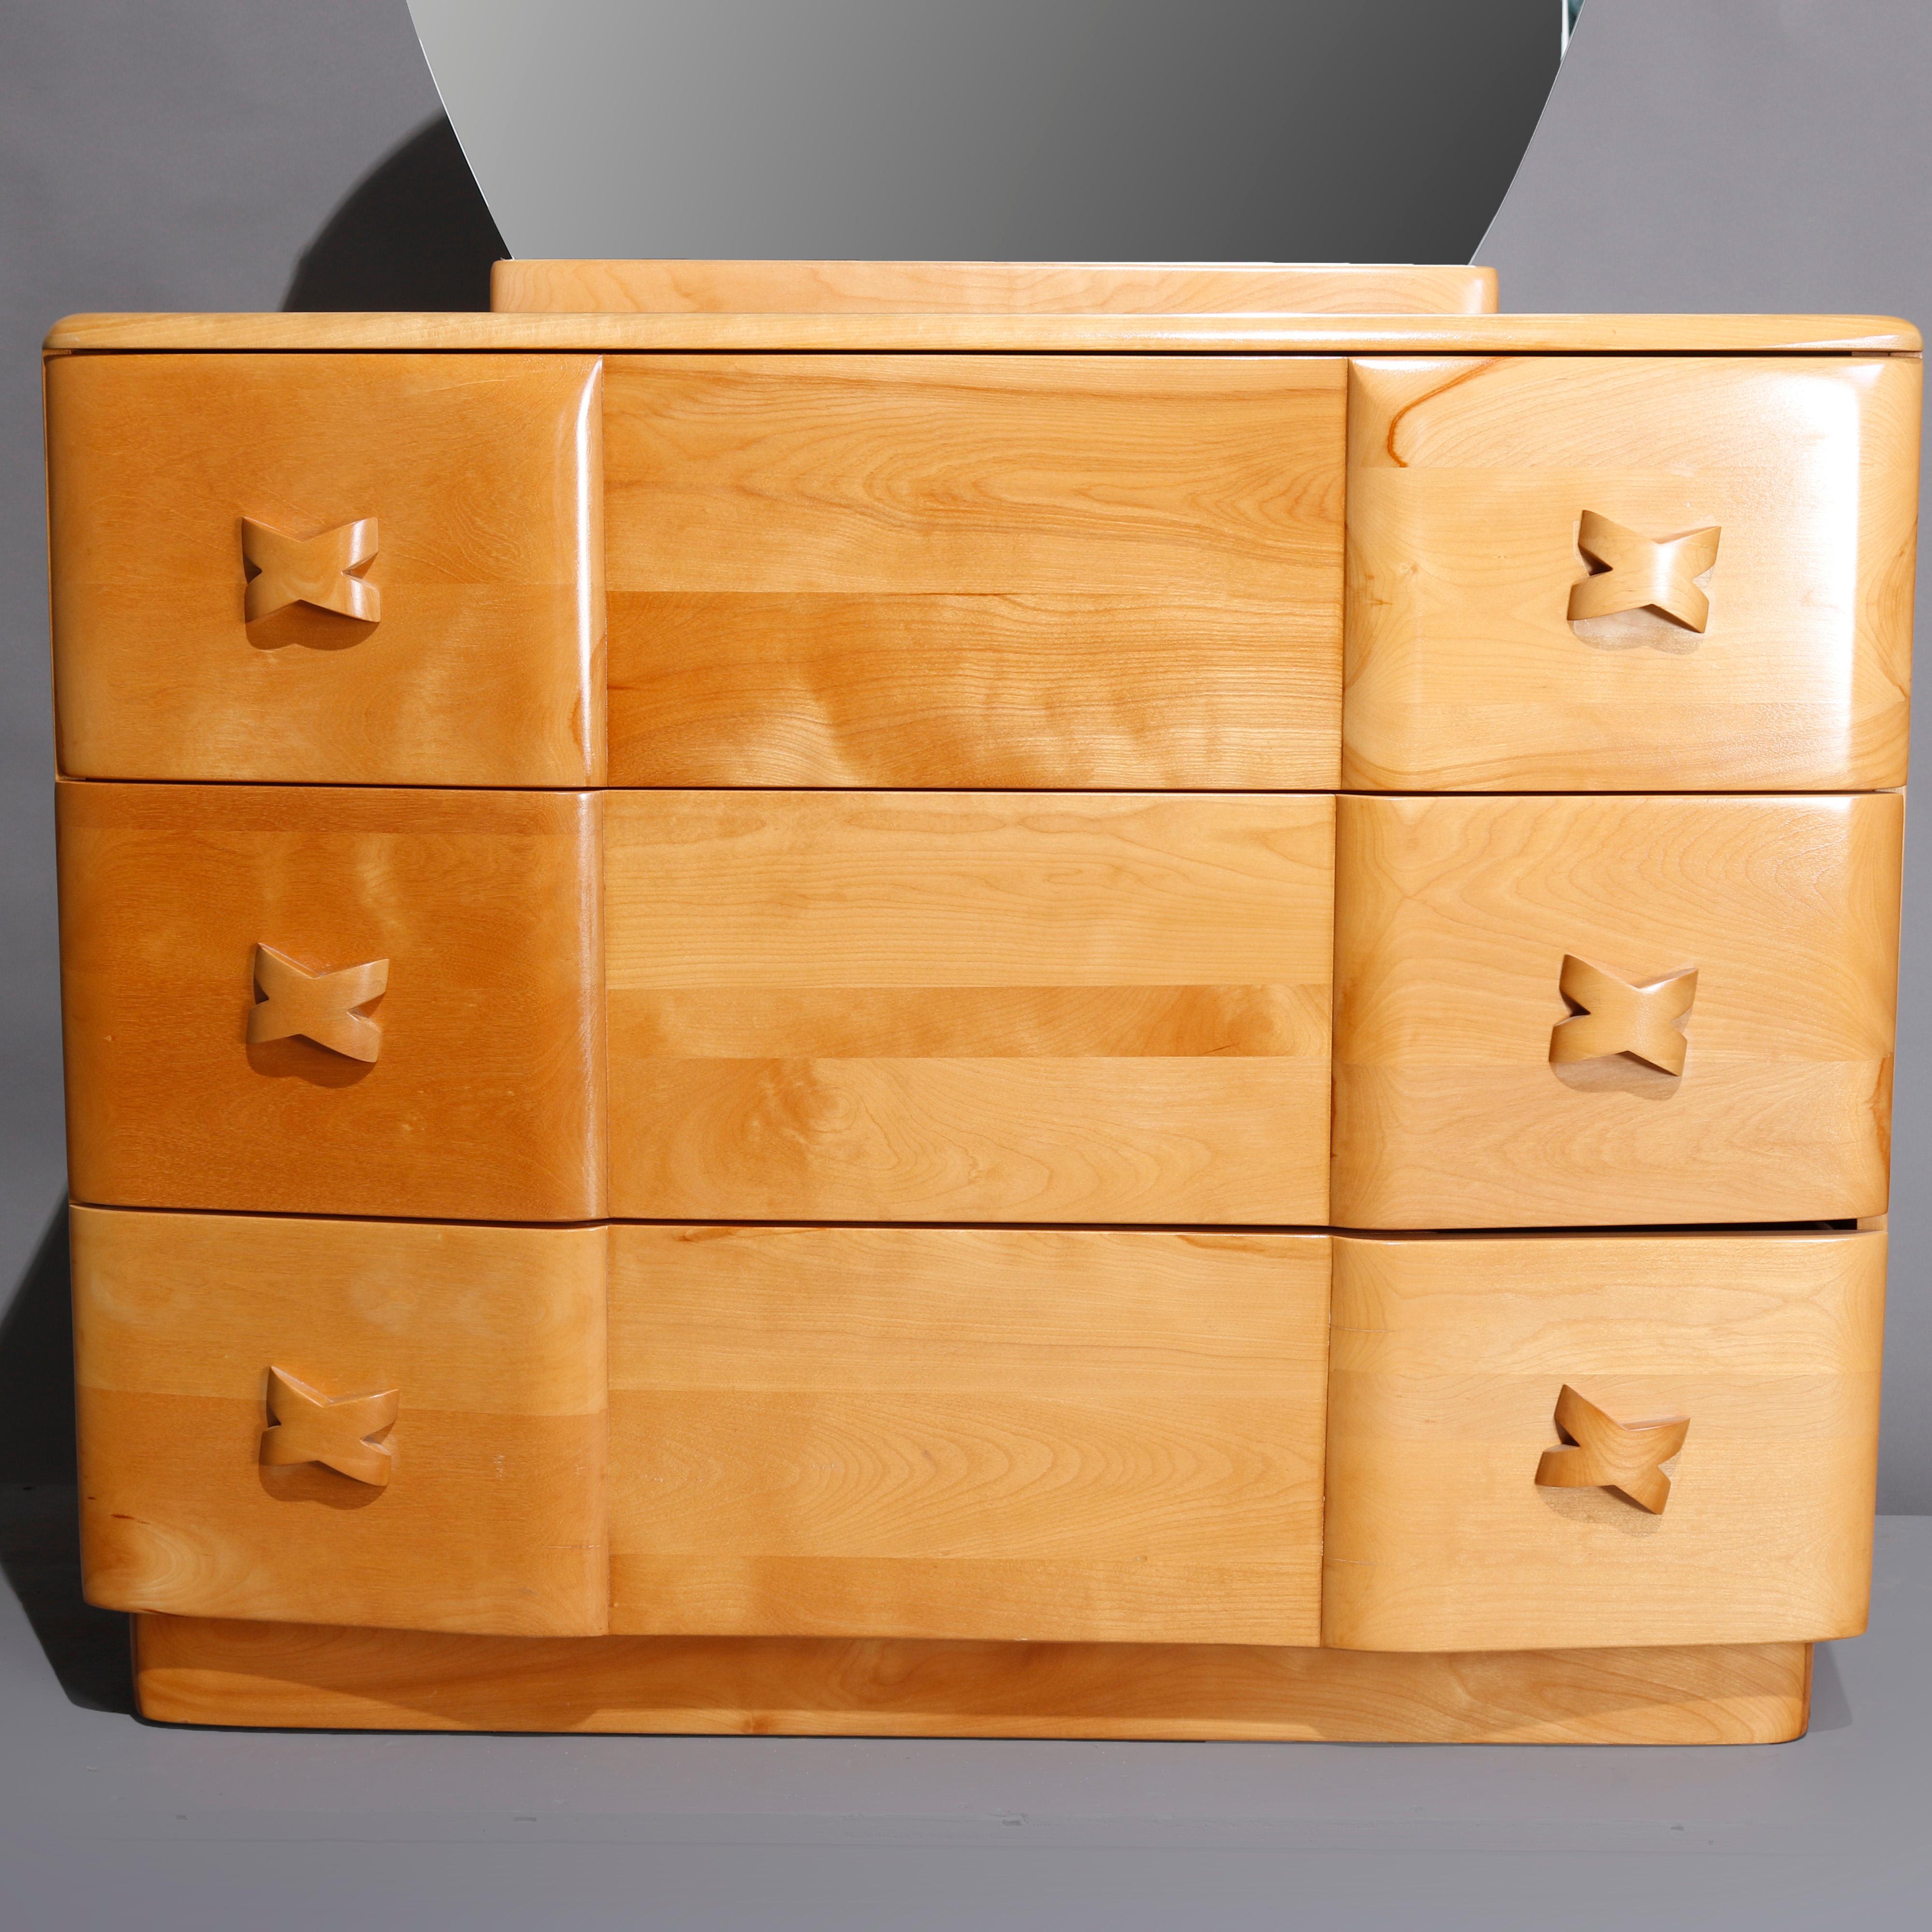 A Mid-Century Modern Heywood Wakefield mirrored dresser in Rio offer circular mirror surmounting three long drawers with X-form handles, originally Champagne and possibly refinished, 20th century

***DELIVERY NOTICE – Due to COVID-19 we are